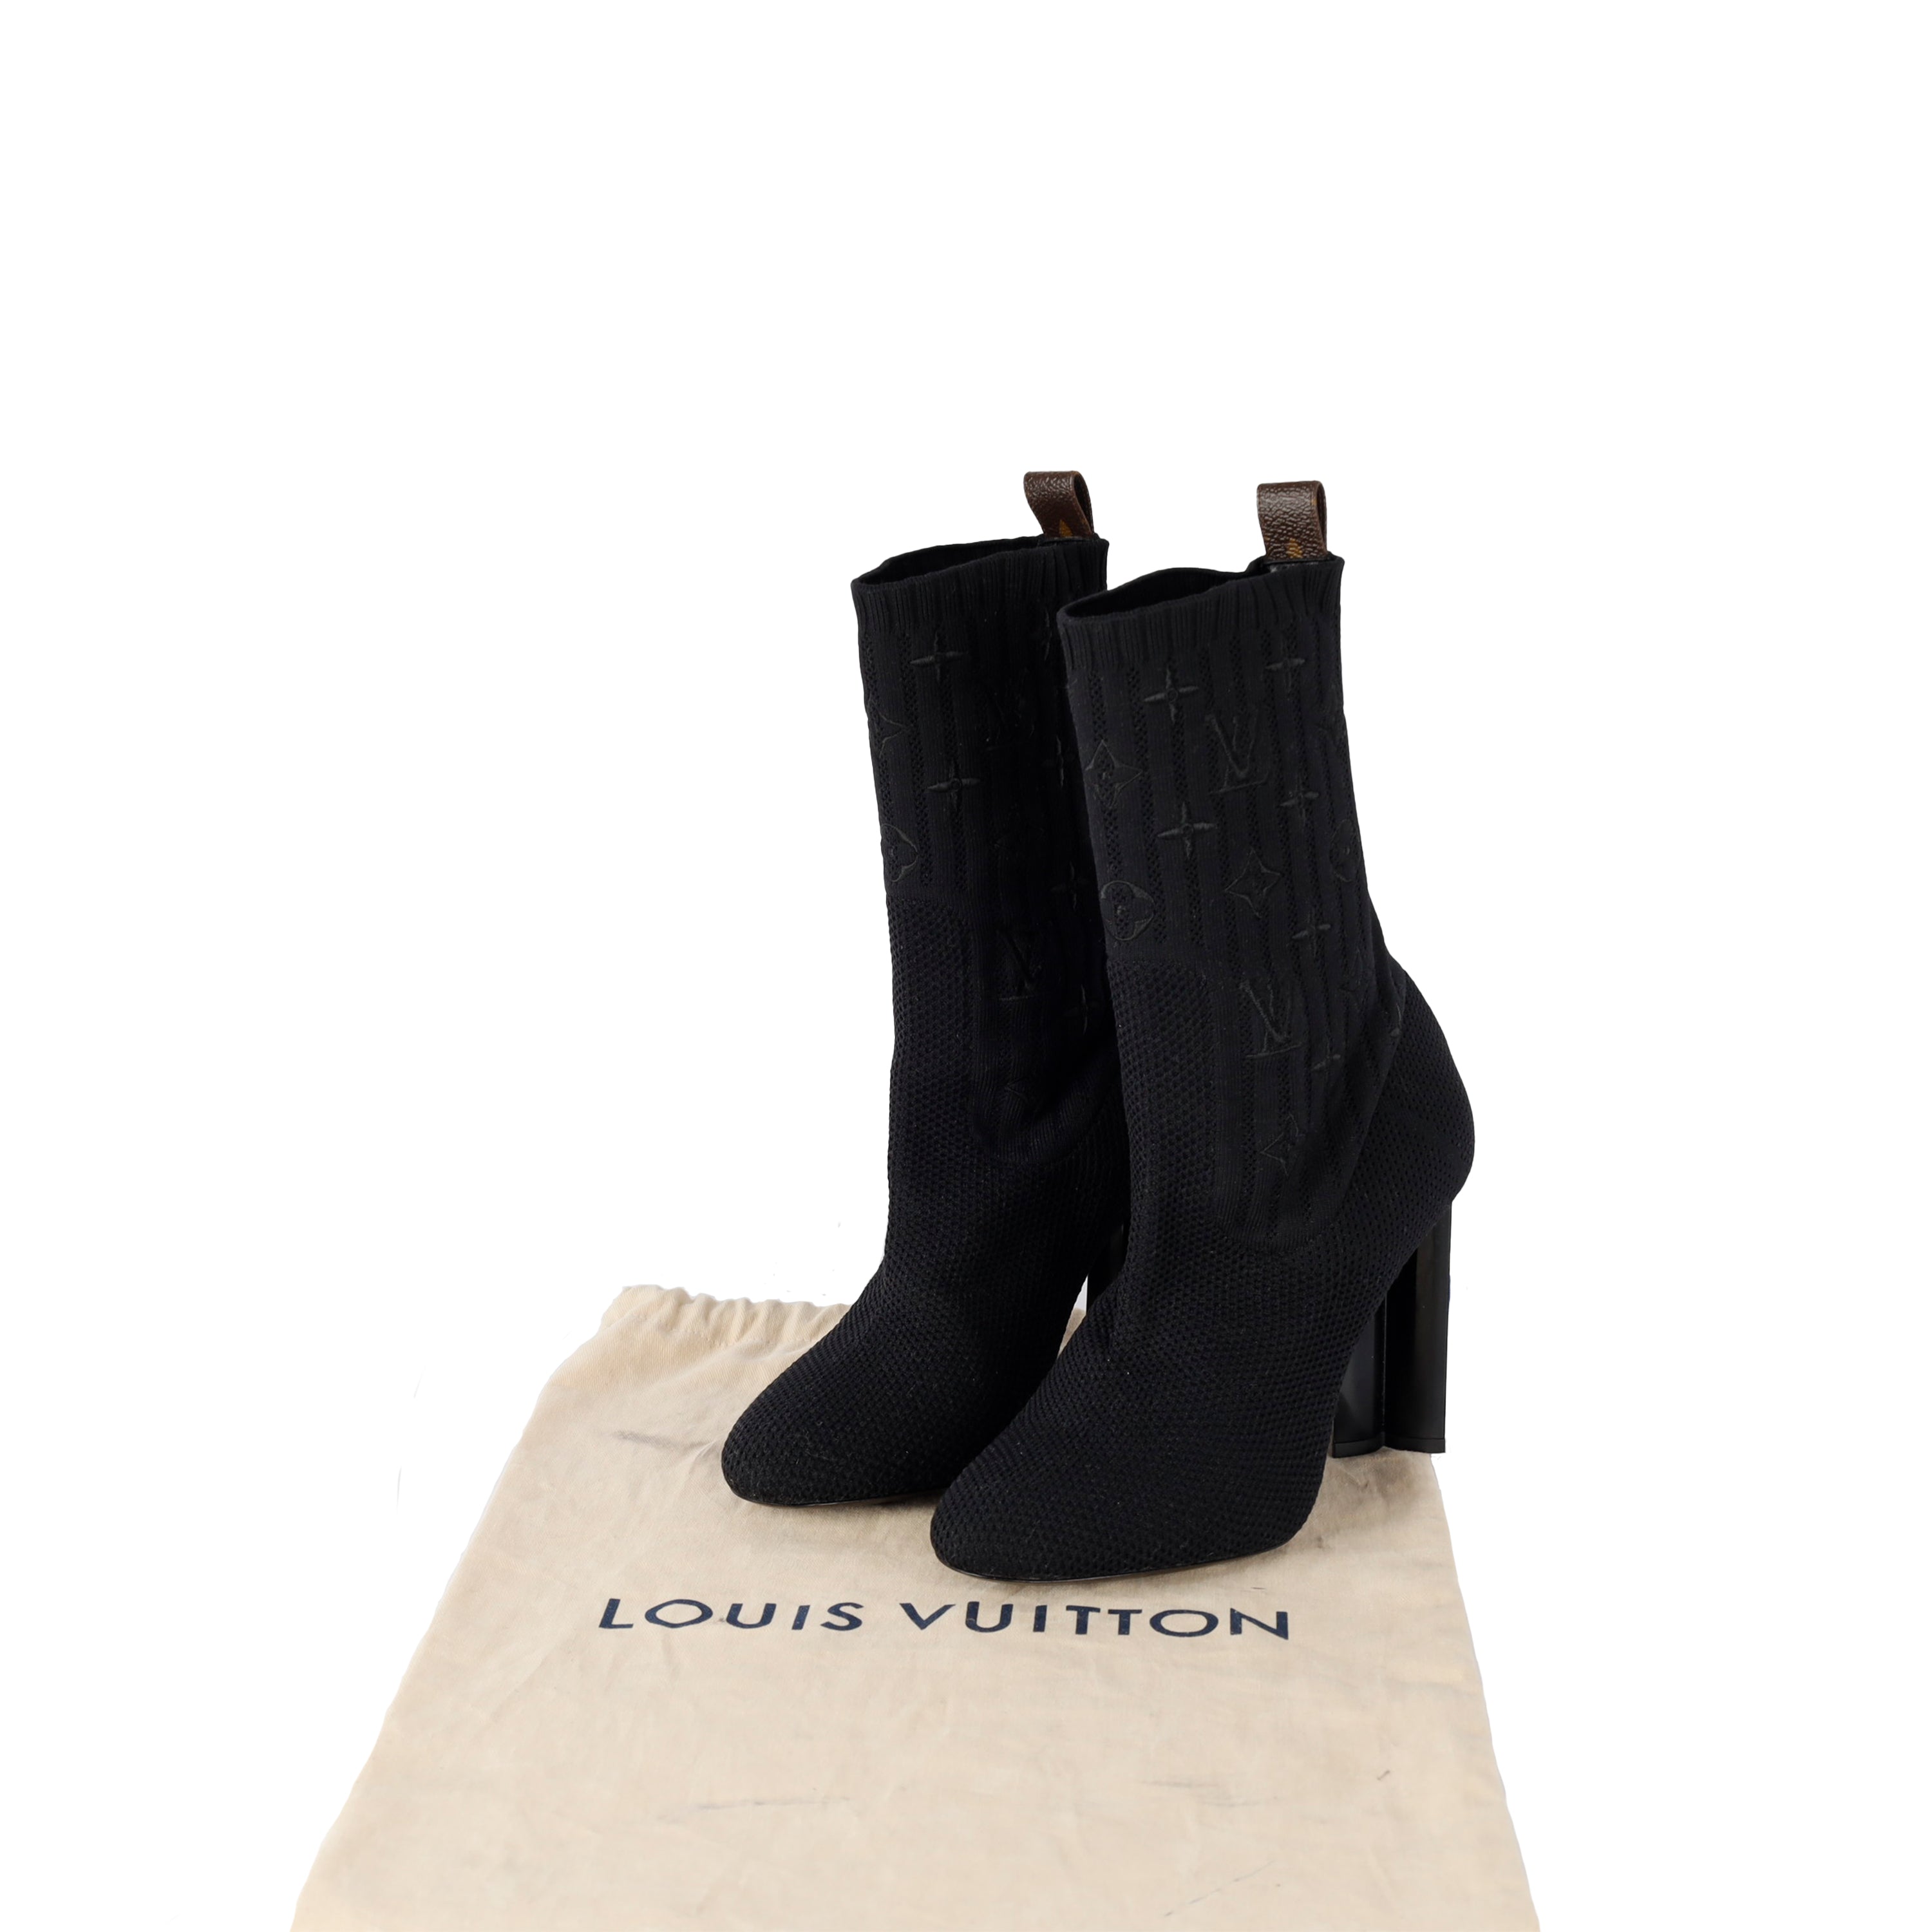 Louis Vuitton Monogram Stretch Fabric Silhouette Ankle Boots